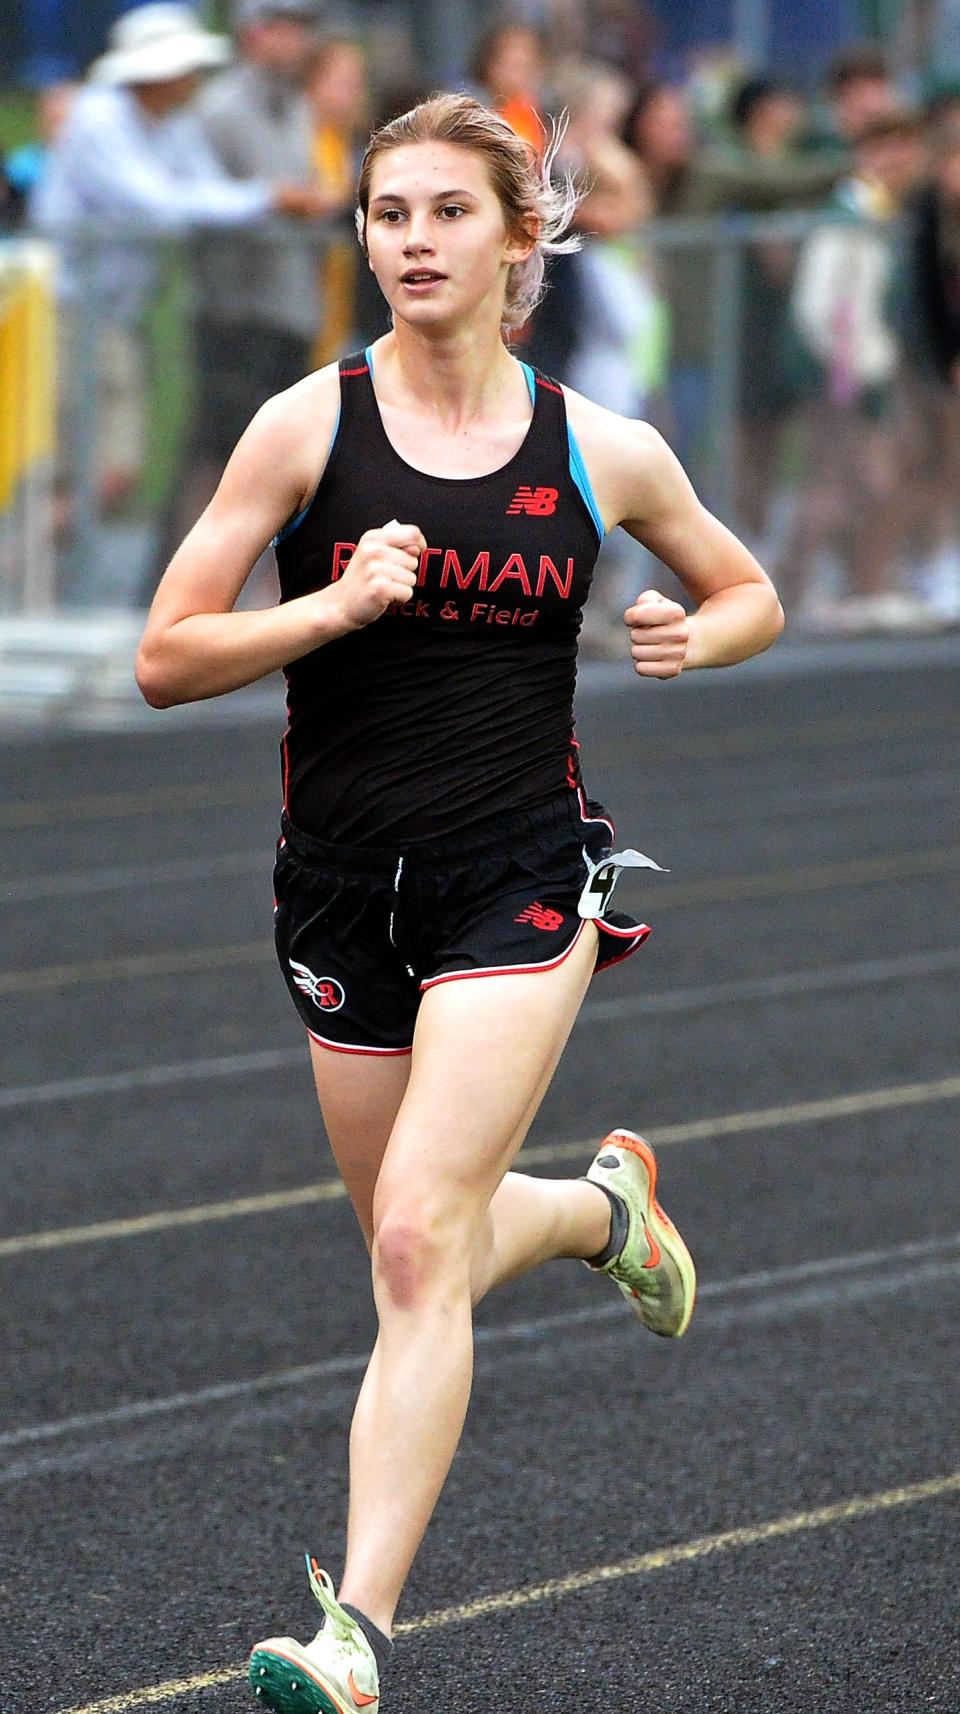 Rittman's Pyper Gibson in the girls 3,200 meter run, one of the two events in which she qualified for state.